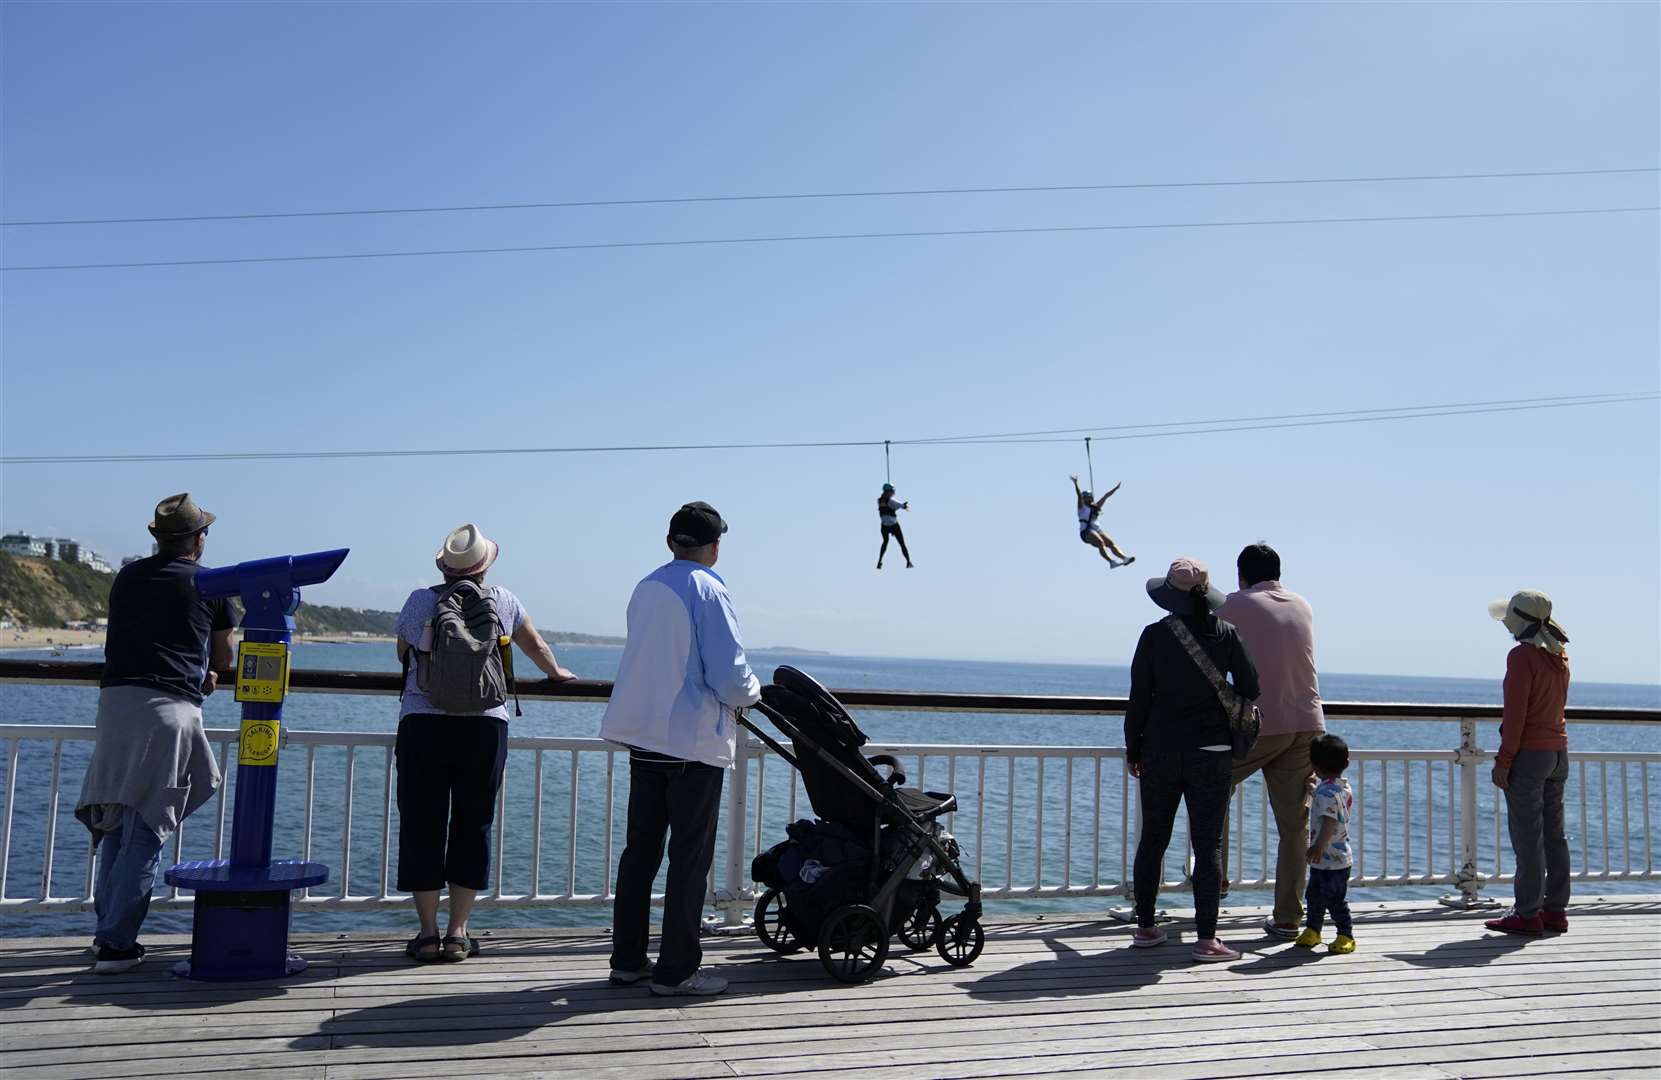 People watch on as some dare to try the zip wire from Bournemouth pier to the beach (Andrew Matthews/PA)